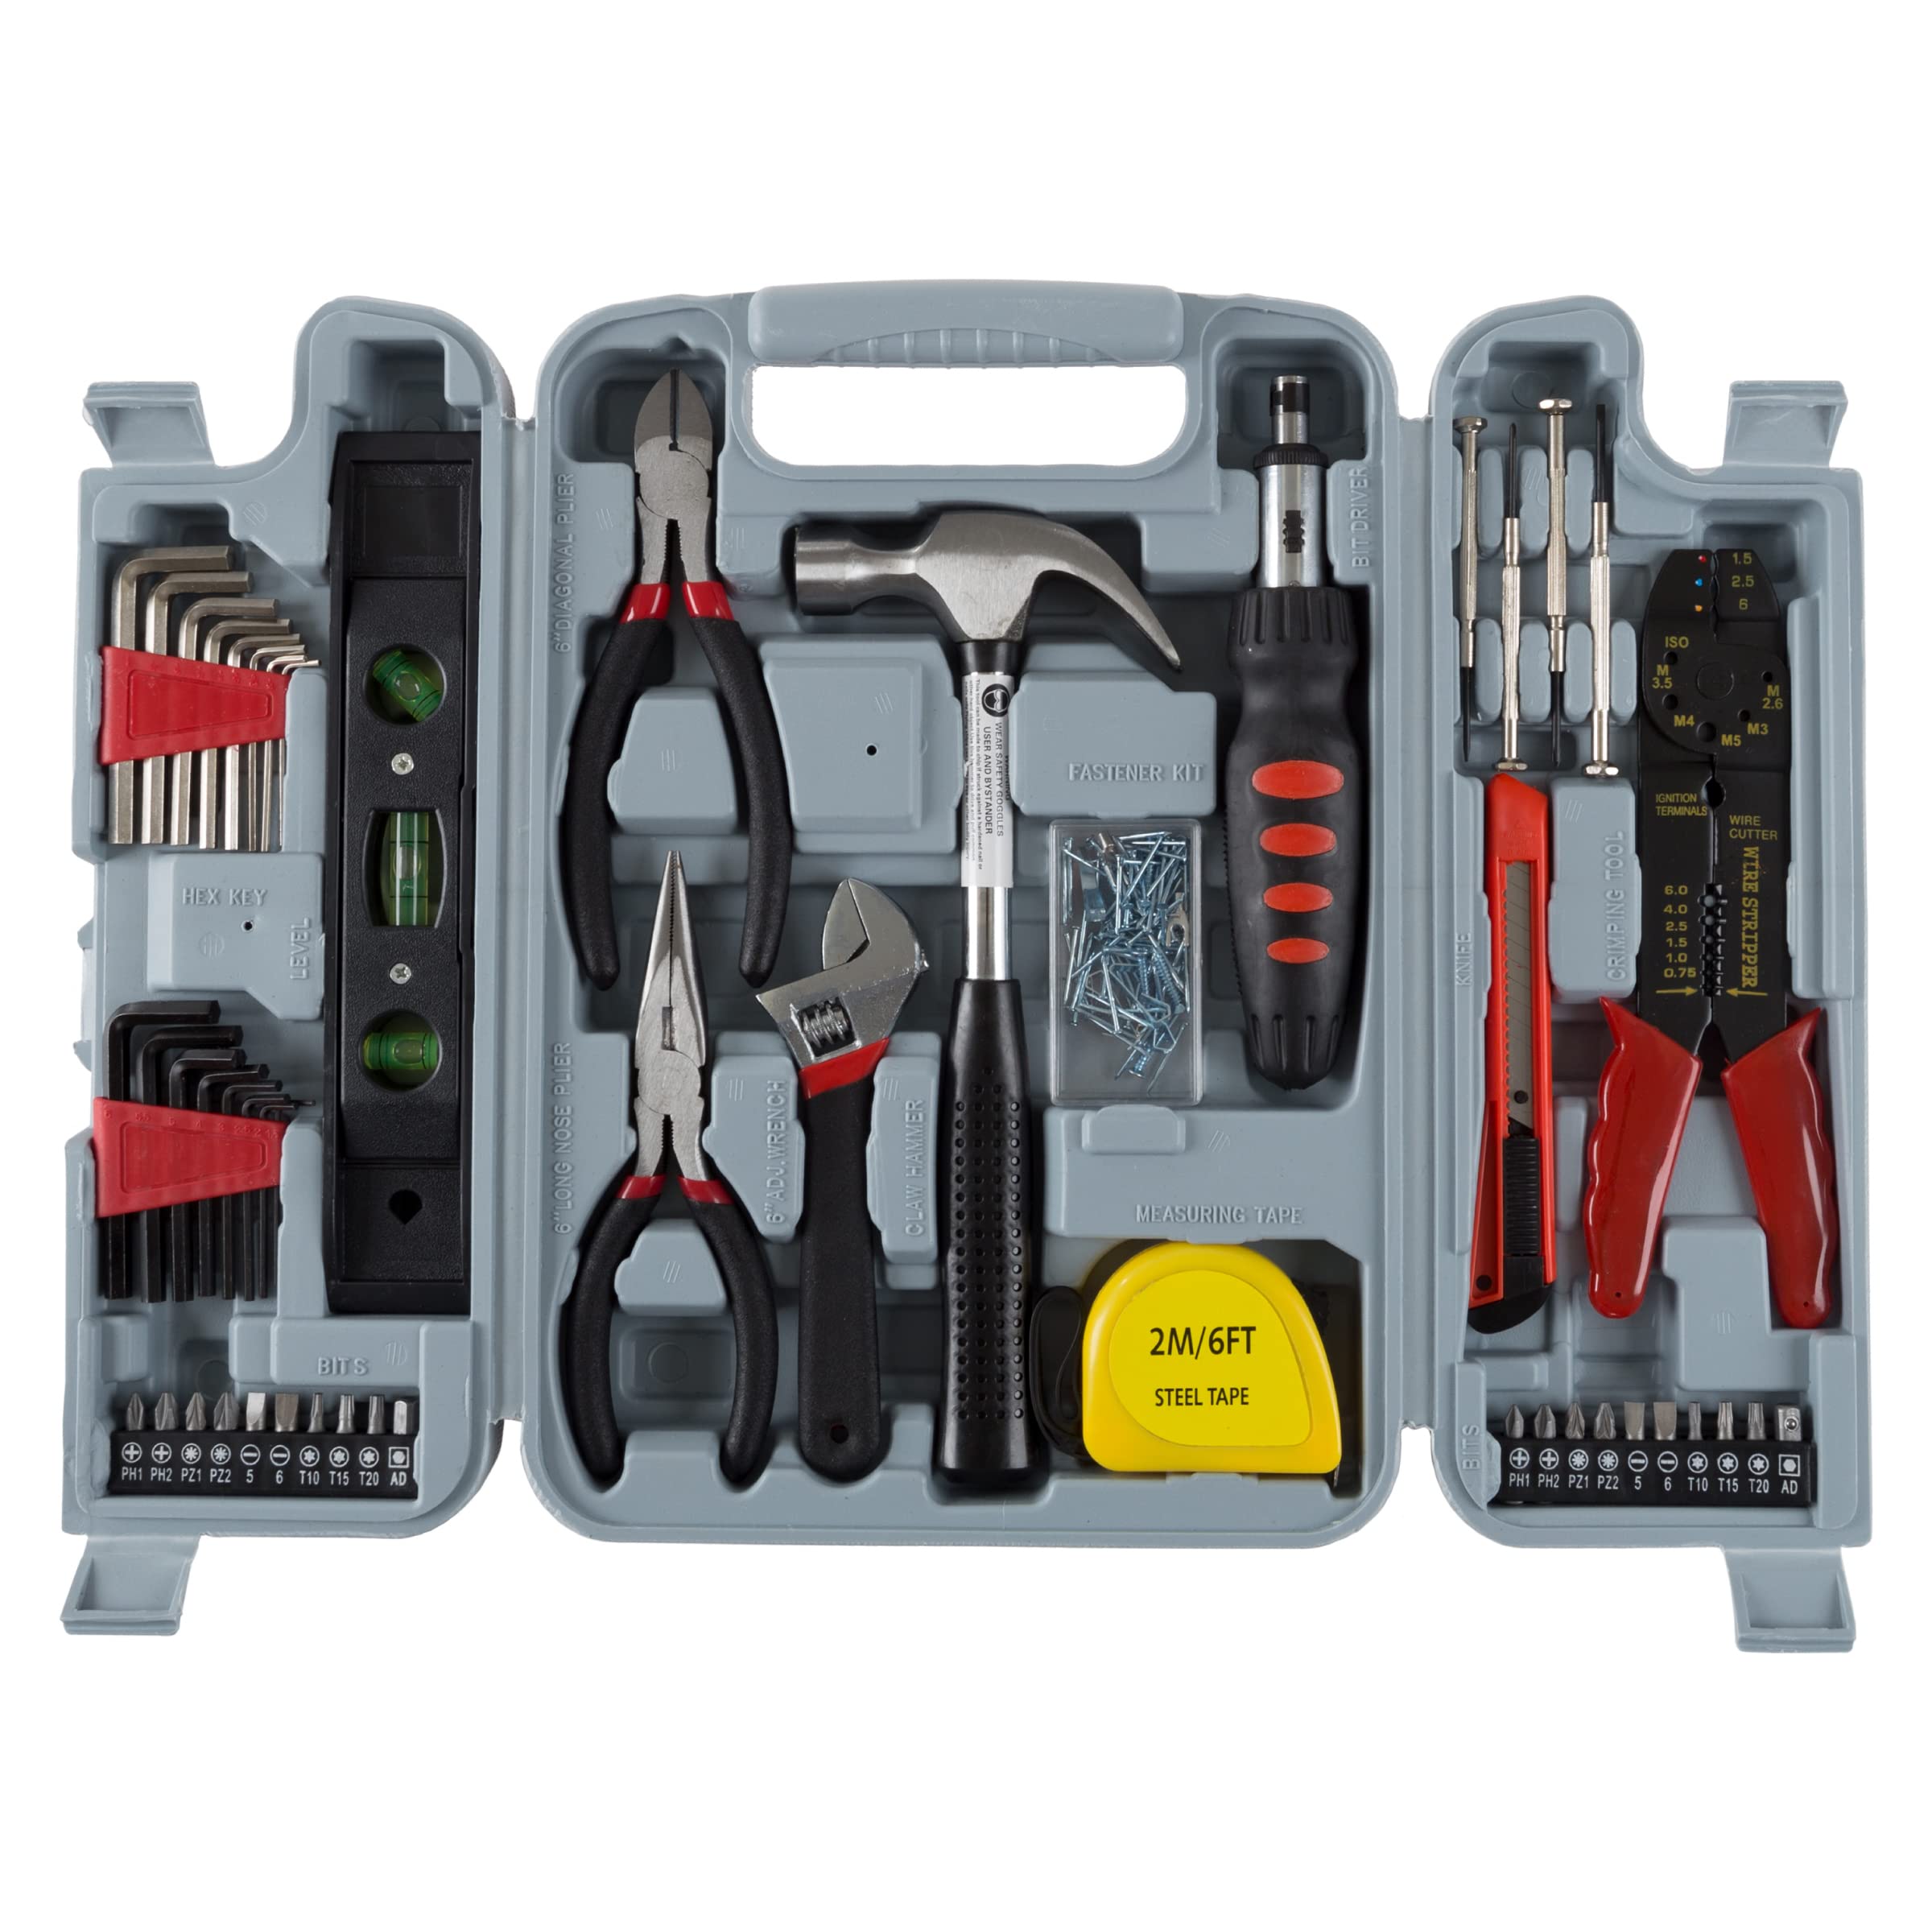 Book Cover 130-Piece Tool Kit - Tools and Home Improvement Set with Hammer, Wrenches, Screwdriver, Pliers, and More - Tool Box for Projects by Stalwart 130 pc Set